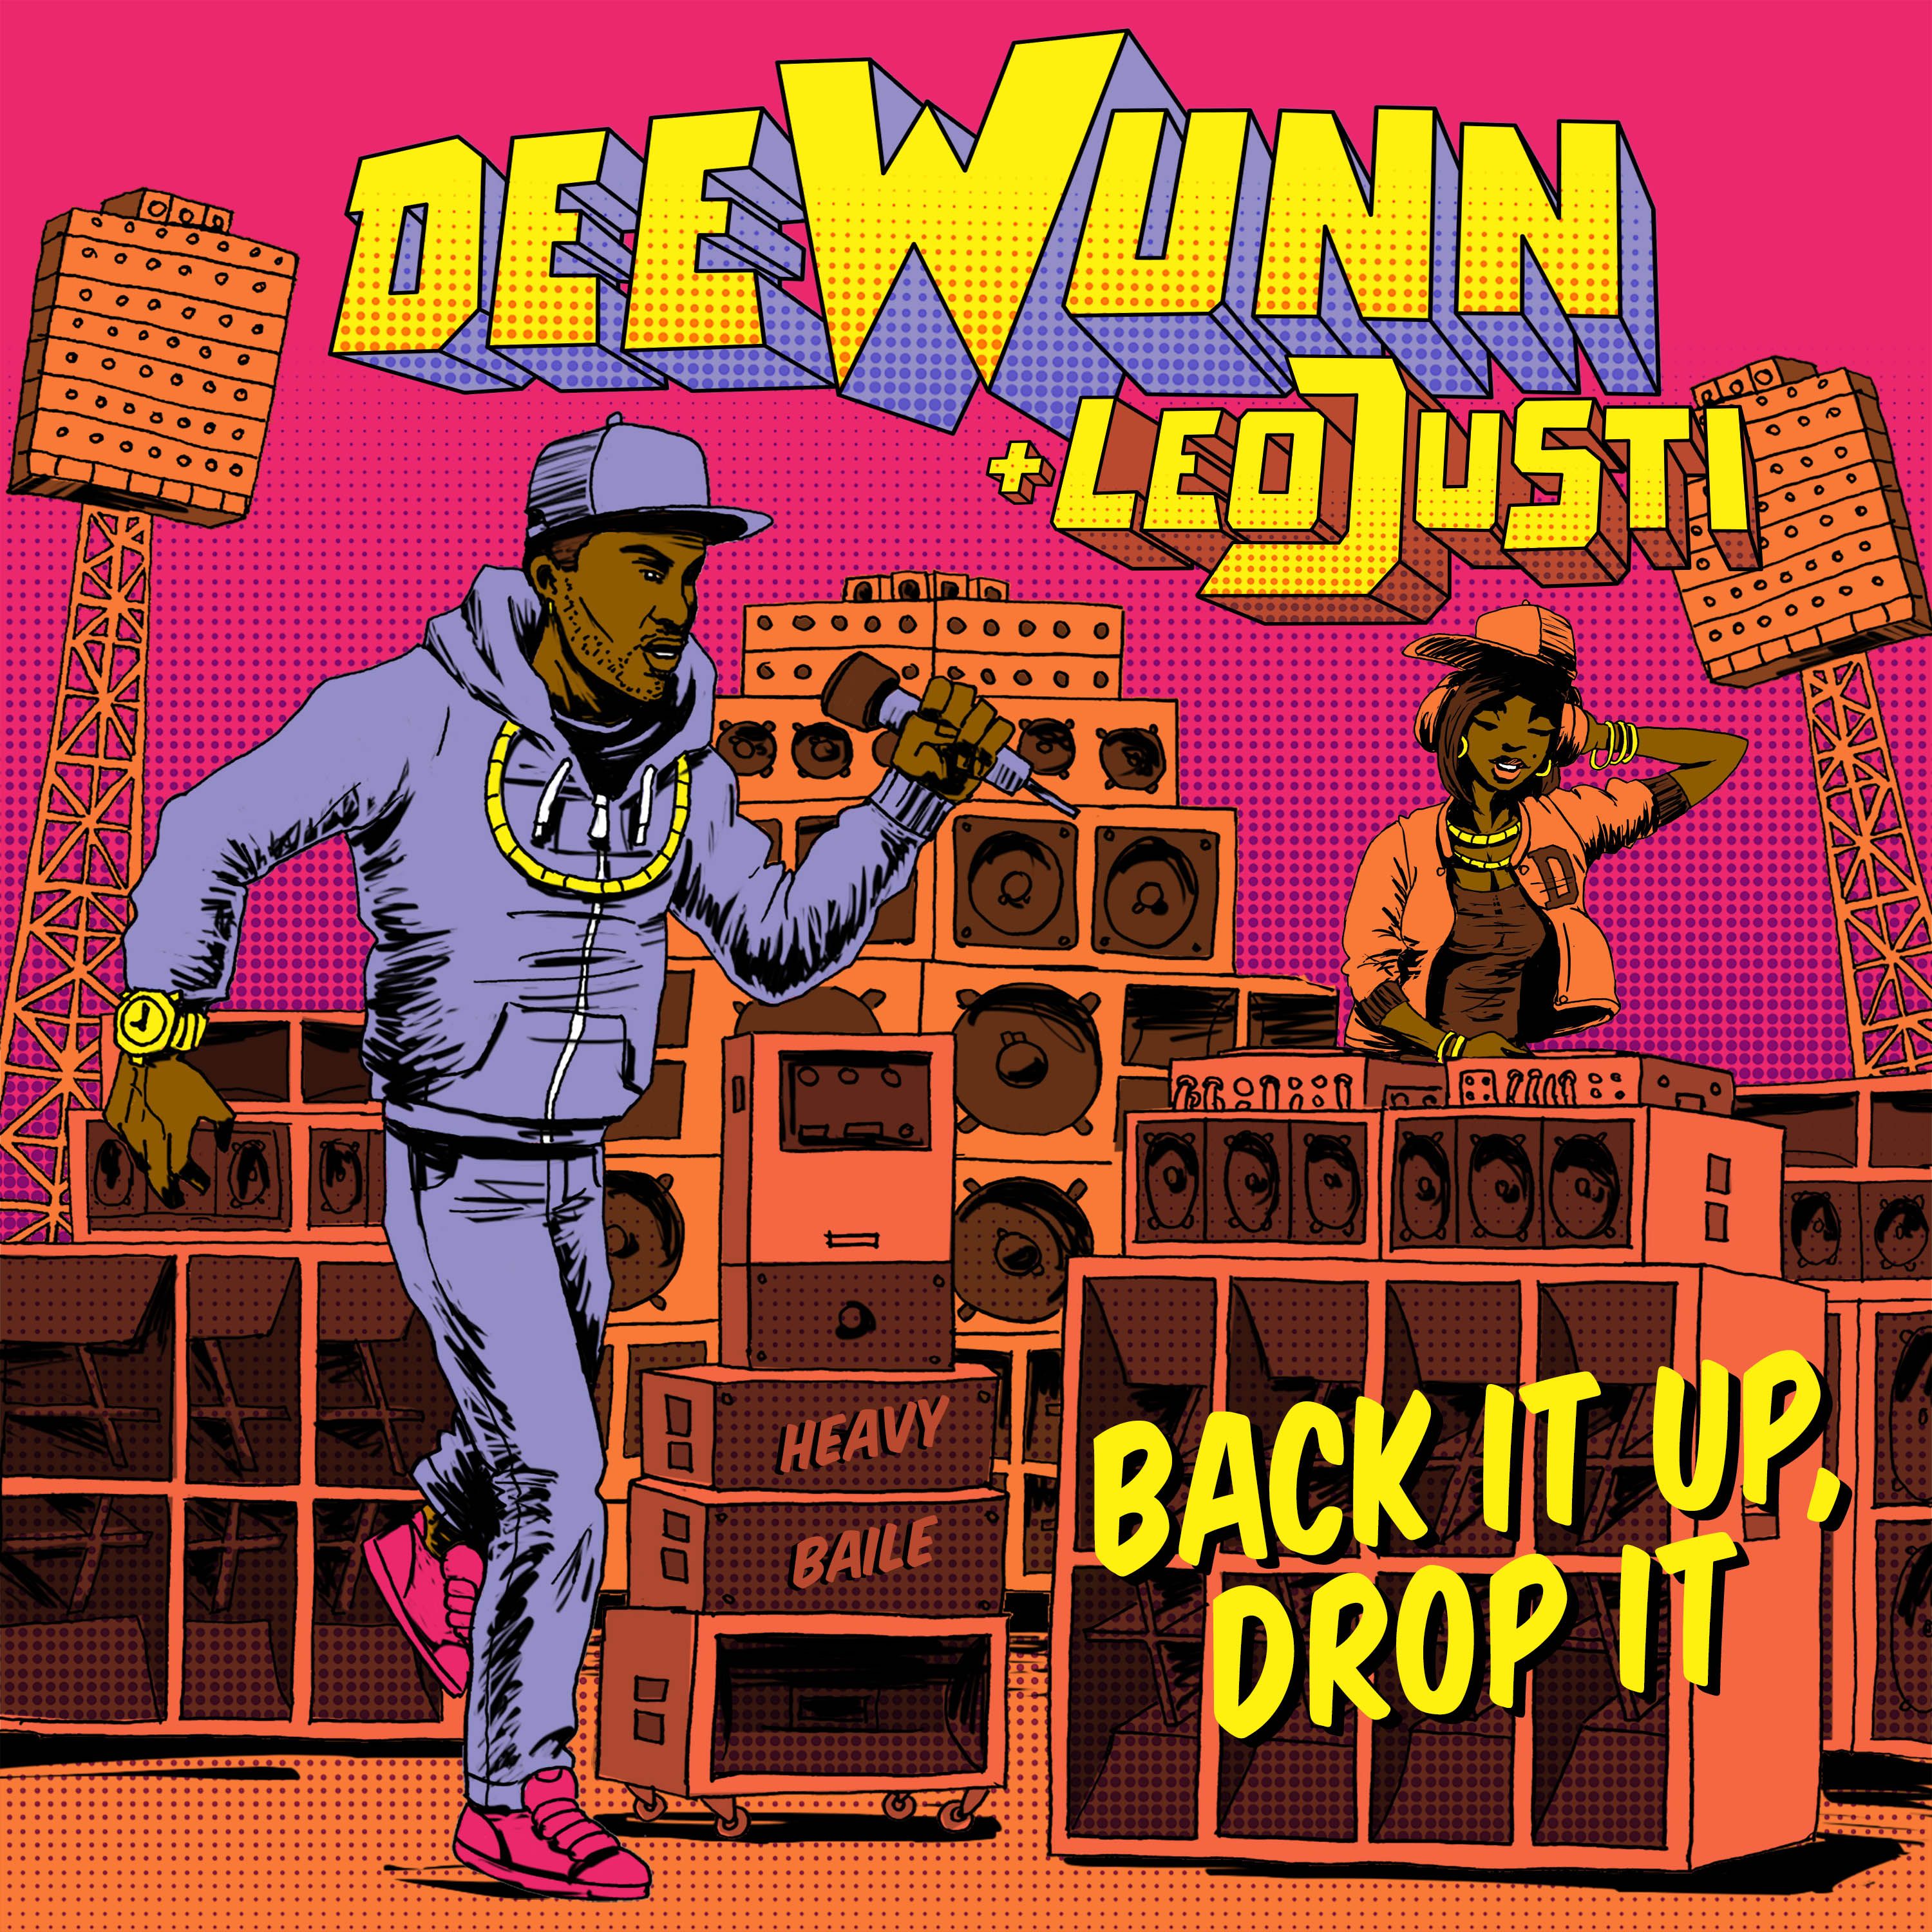 Download DeeWunn + Leo Justi "Back It, Up Drop It" by Waxploitation Records  mp3 - Soundcloud to mp3 converter